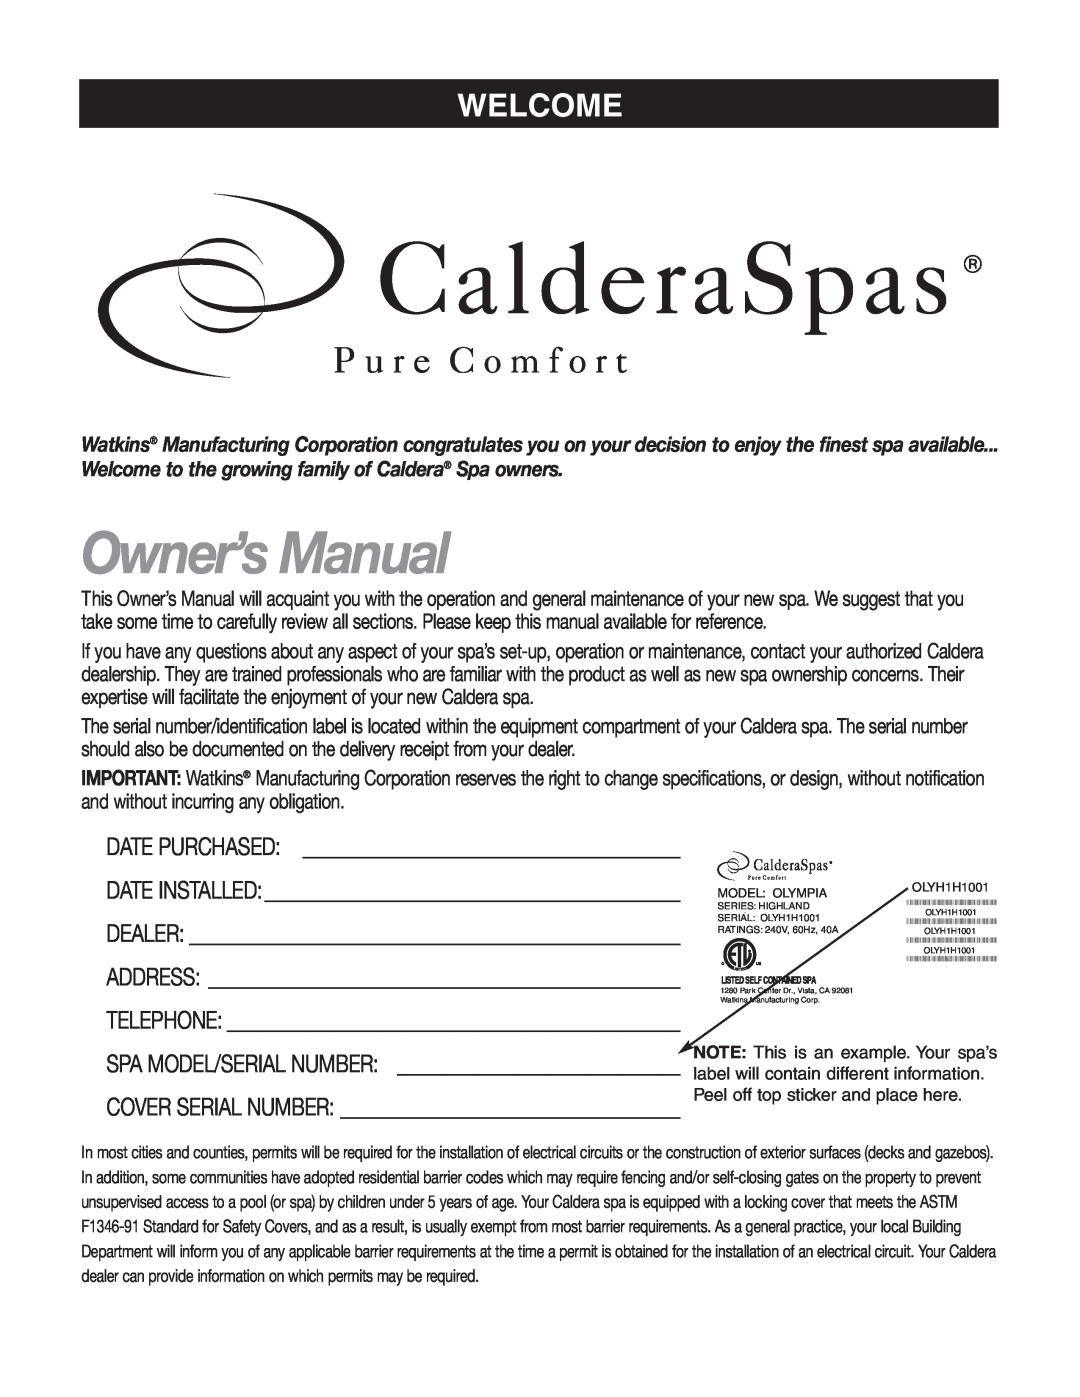 Caldera Highland Series owner manual Welcome to the growing family of Caldera Spa owners 